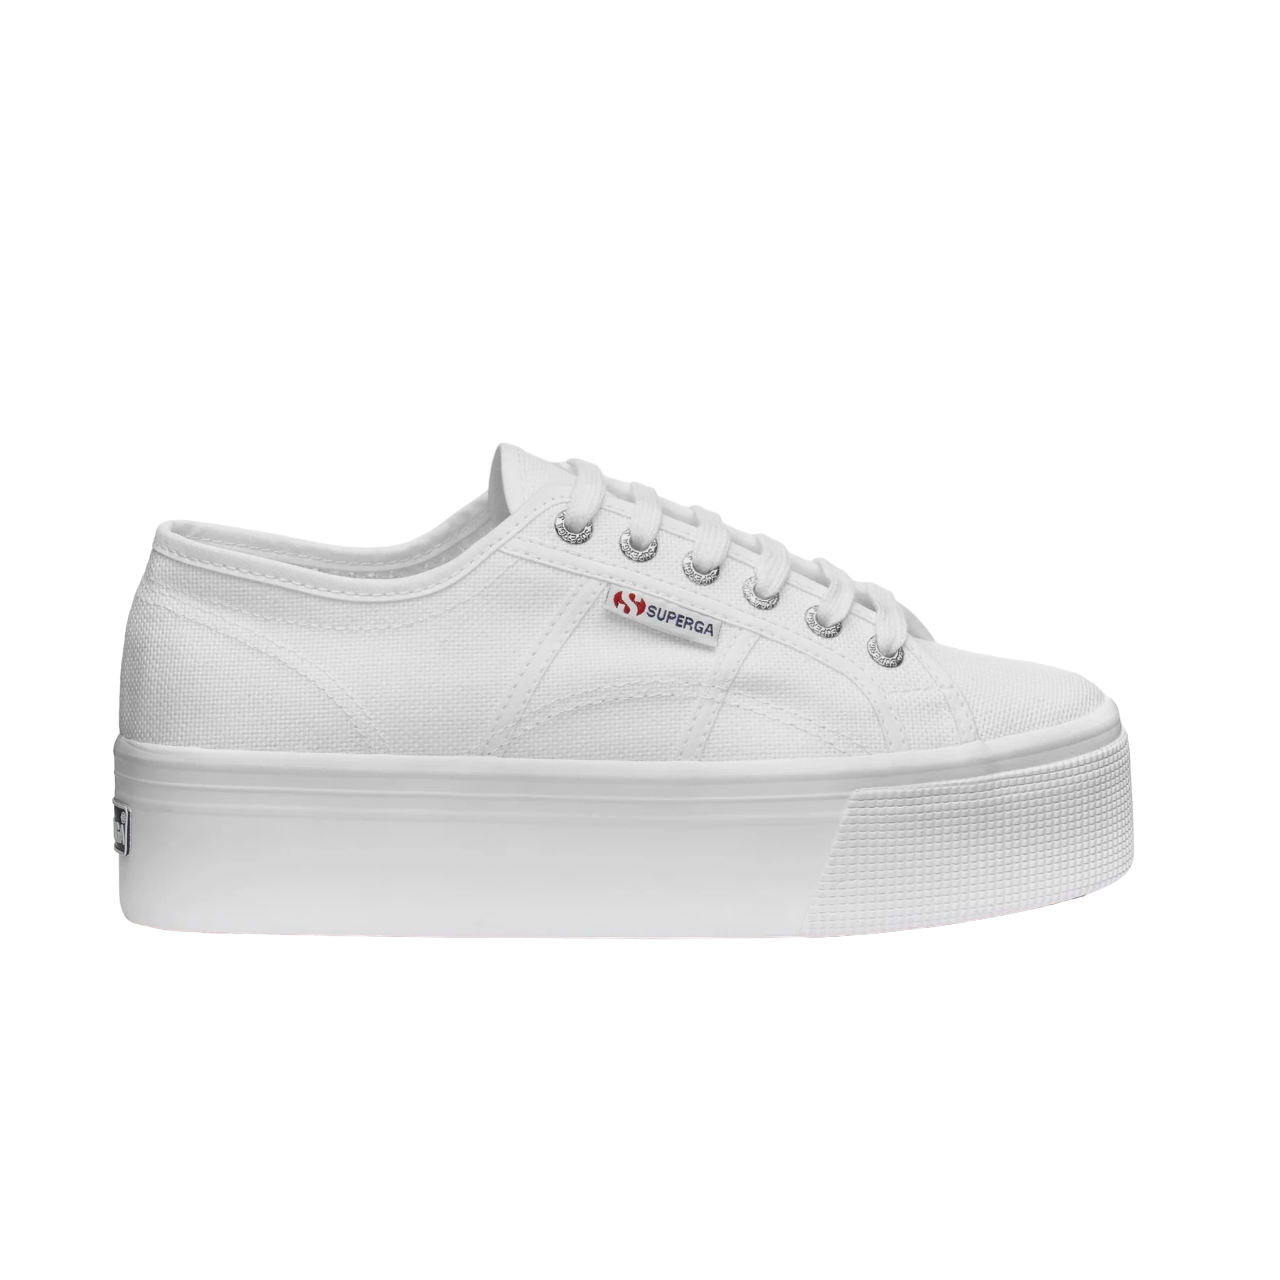 Superga scarpa sneakers da donna 2790 Cotw Linea Up and Down S9111LW 901 bianco